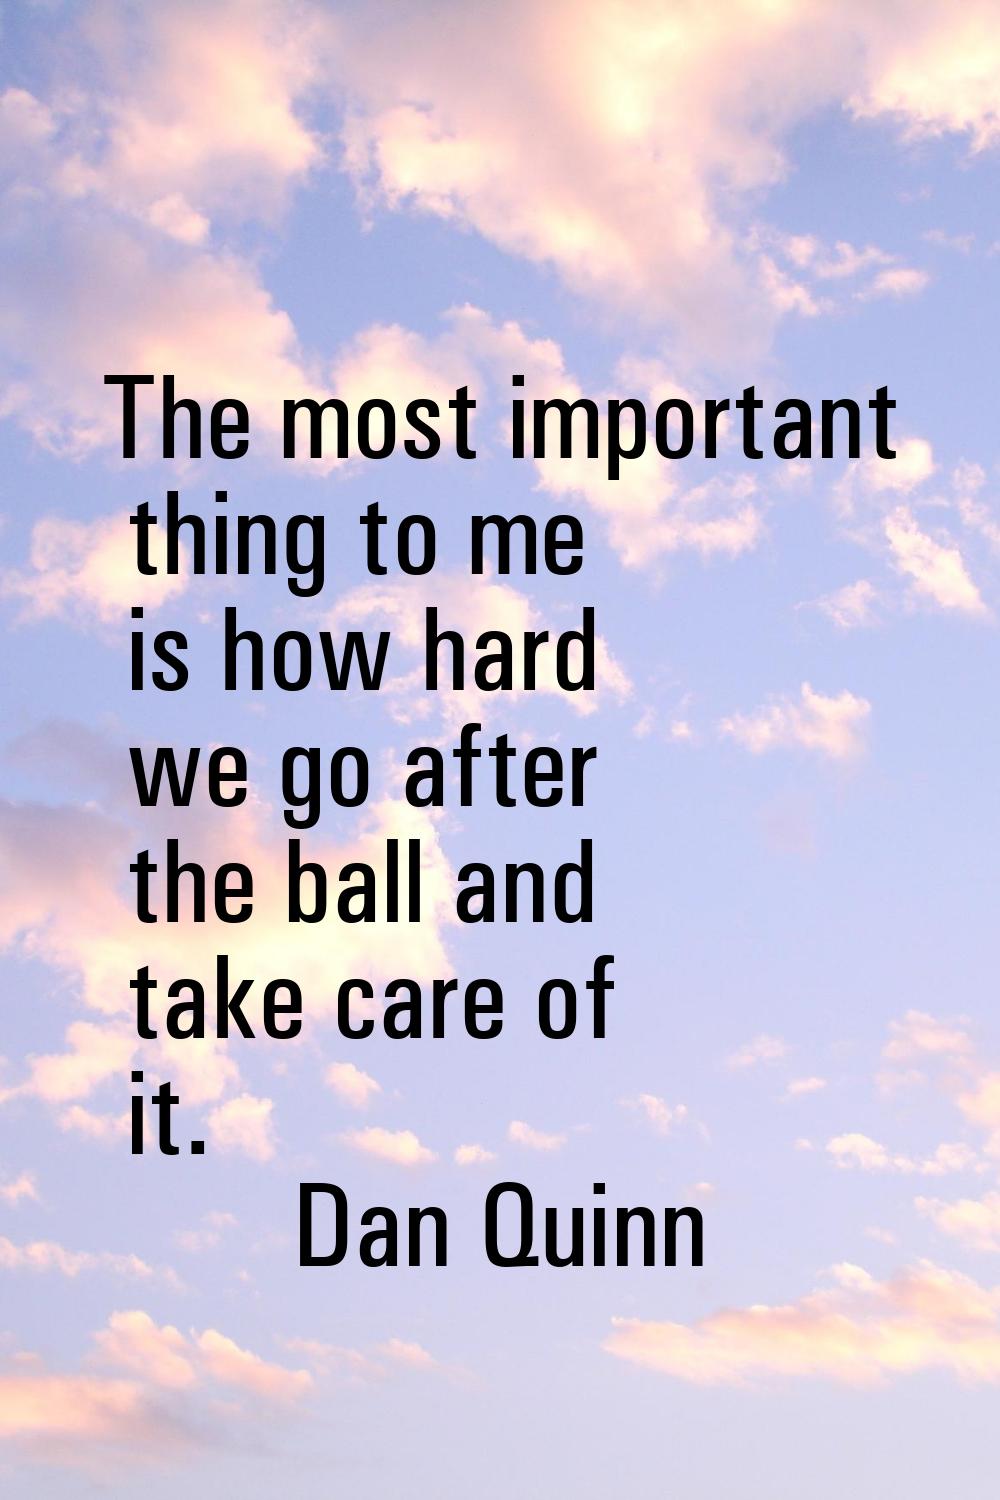 The most important thing to me is how hard we go after the ball and take care of it.